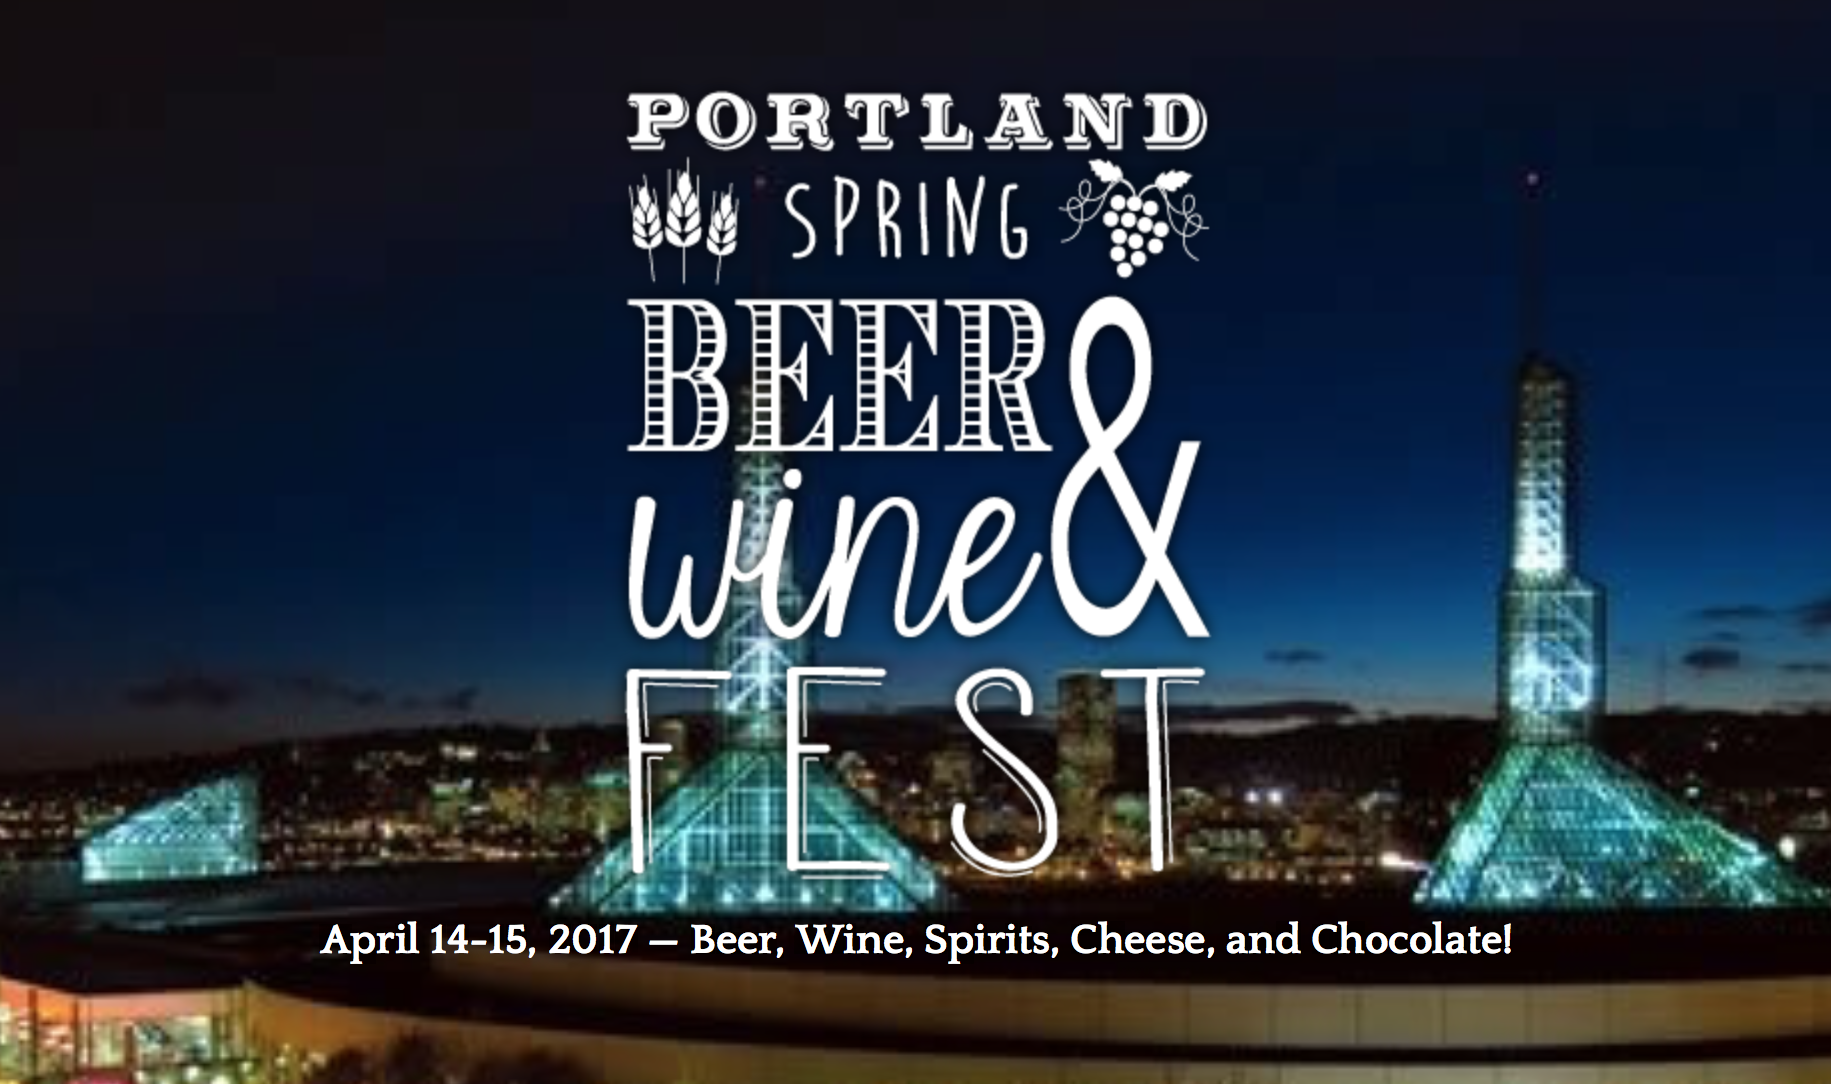 23rd Annual Portland Spring Beer and Wine Fest Returns This Weekend